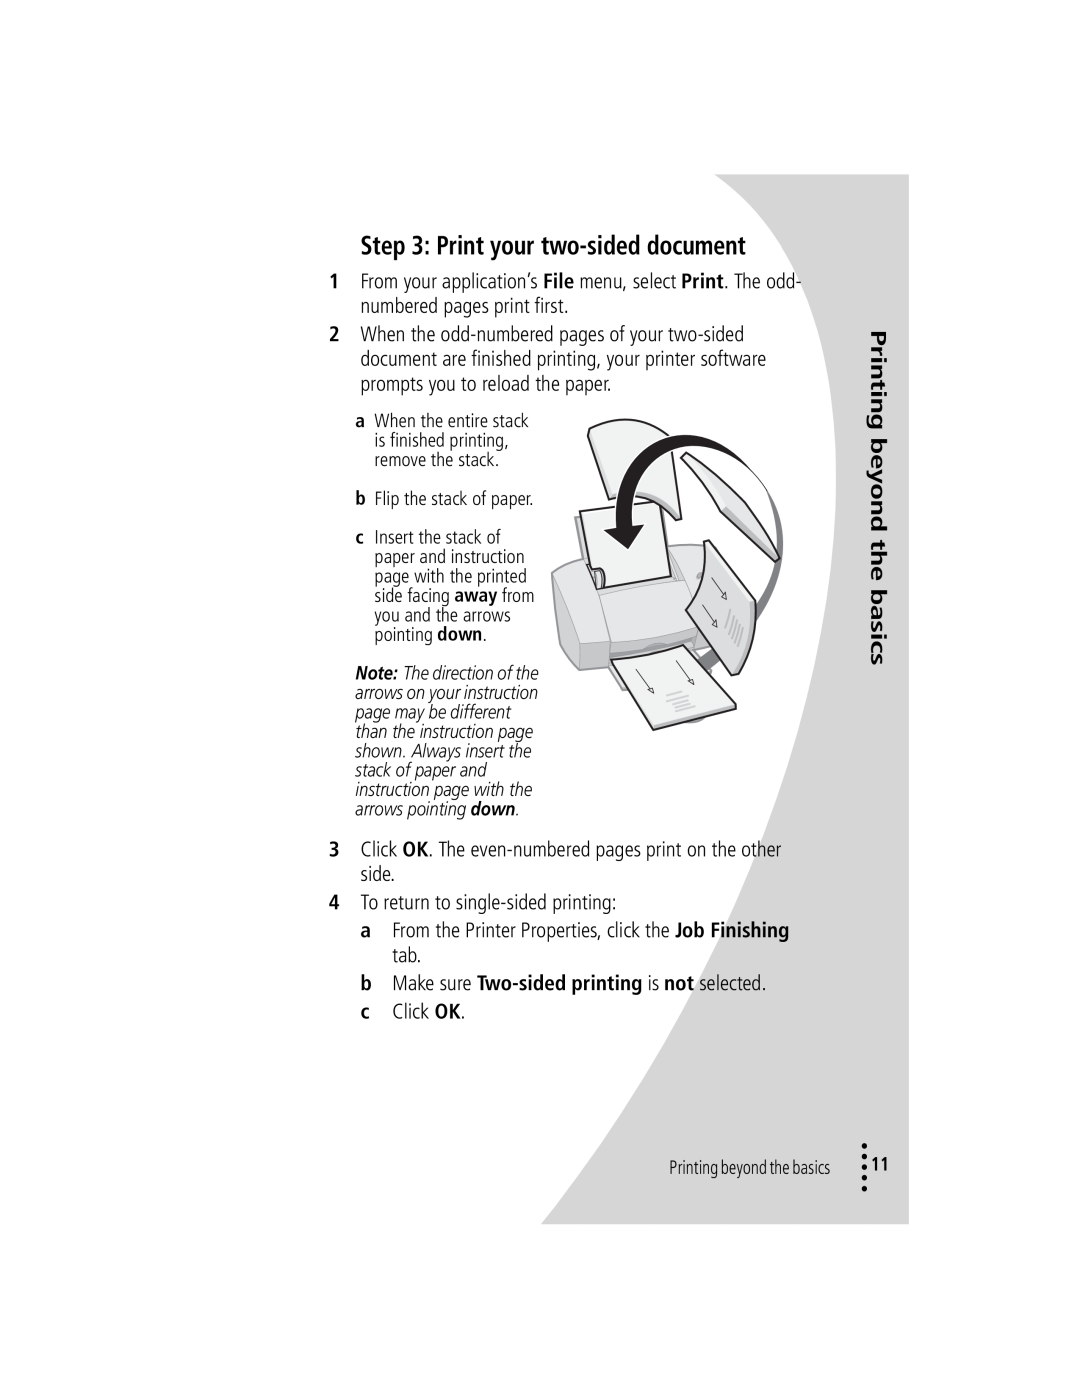 Lexmark Z42 manual Print your two-sided document, Printing beyond the basics 